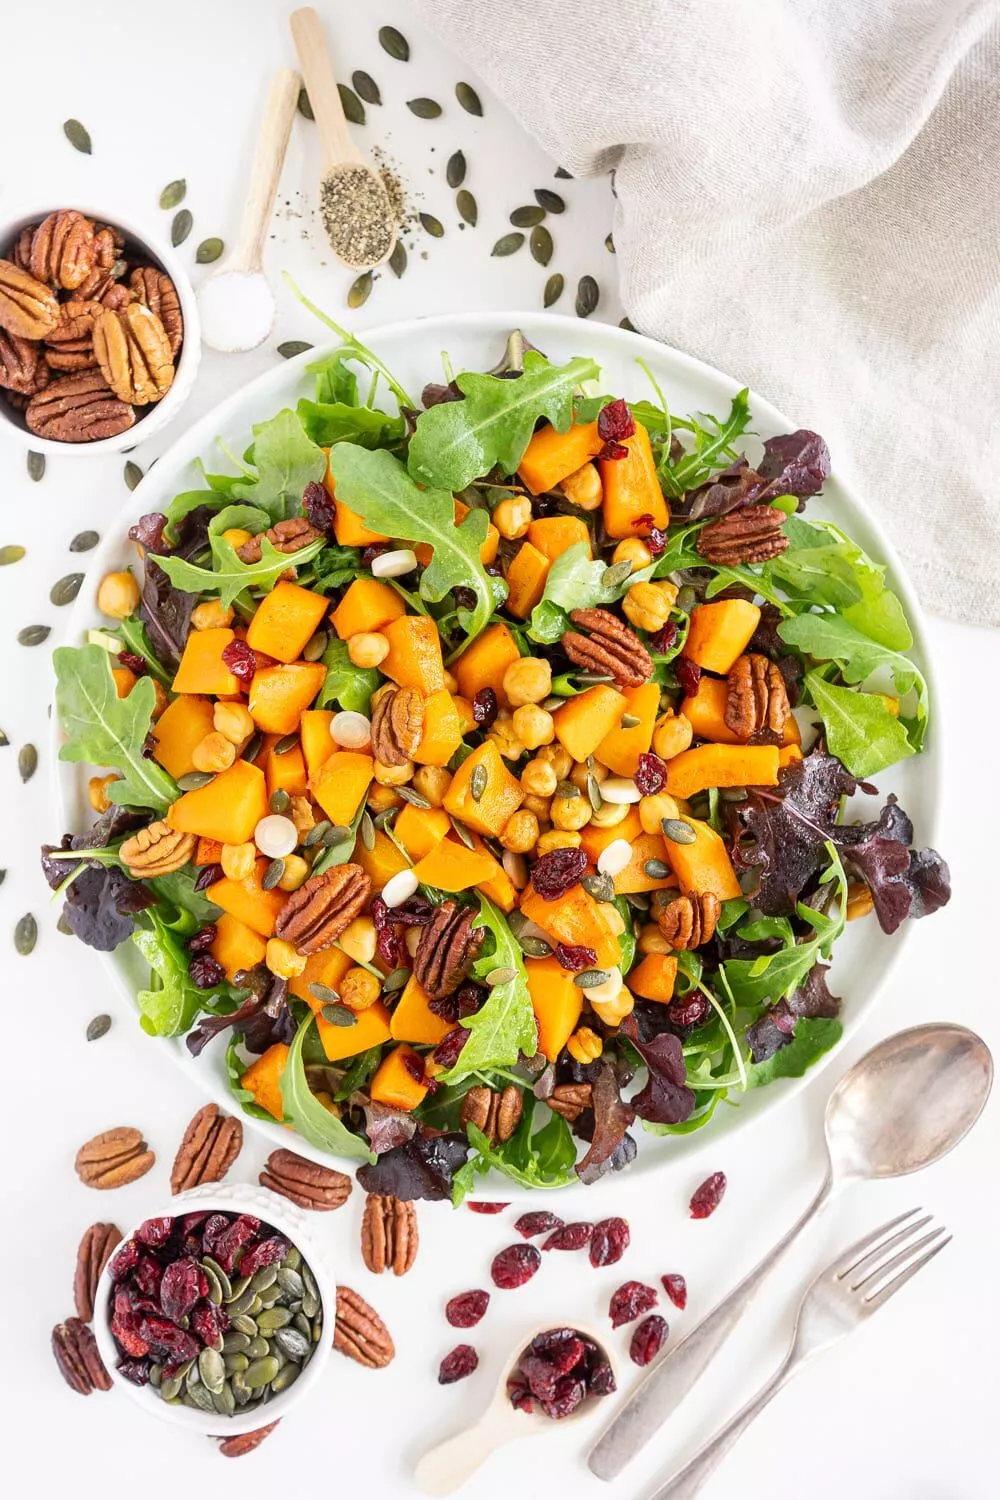 Roasted butternut squash salad with pecans and dried cranberries.